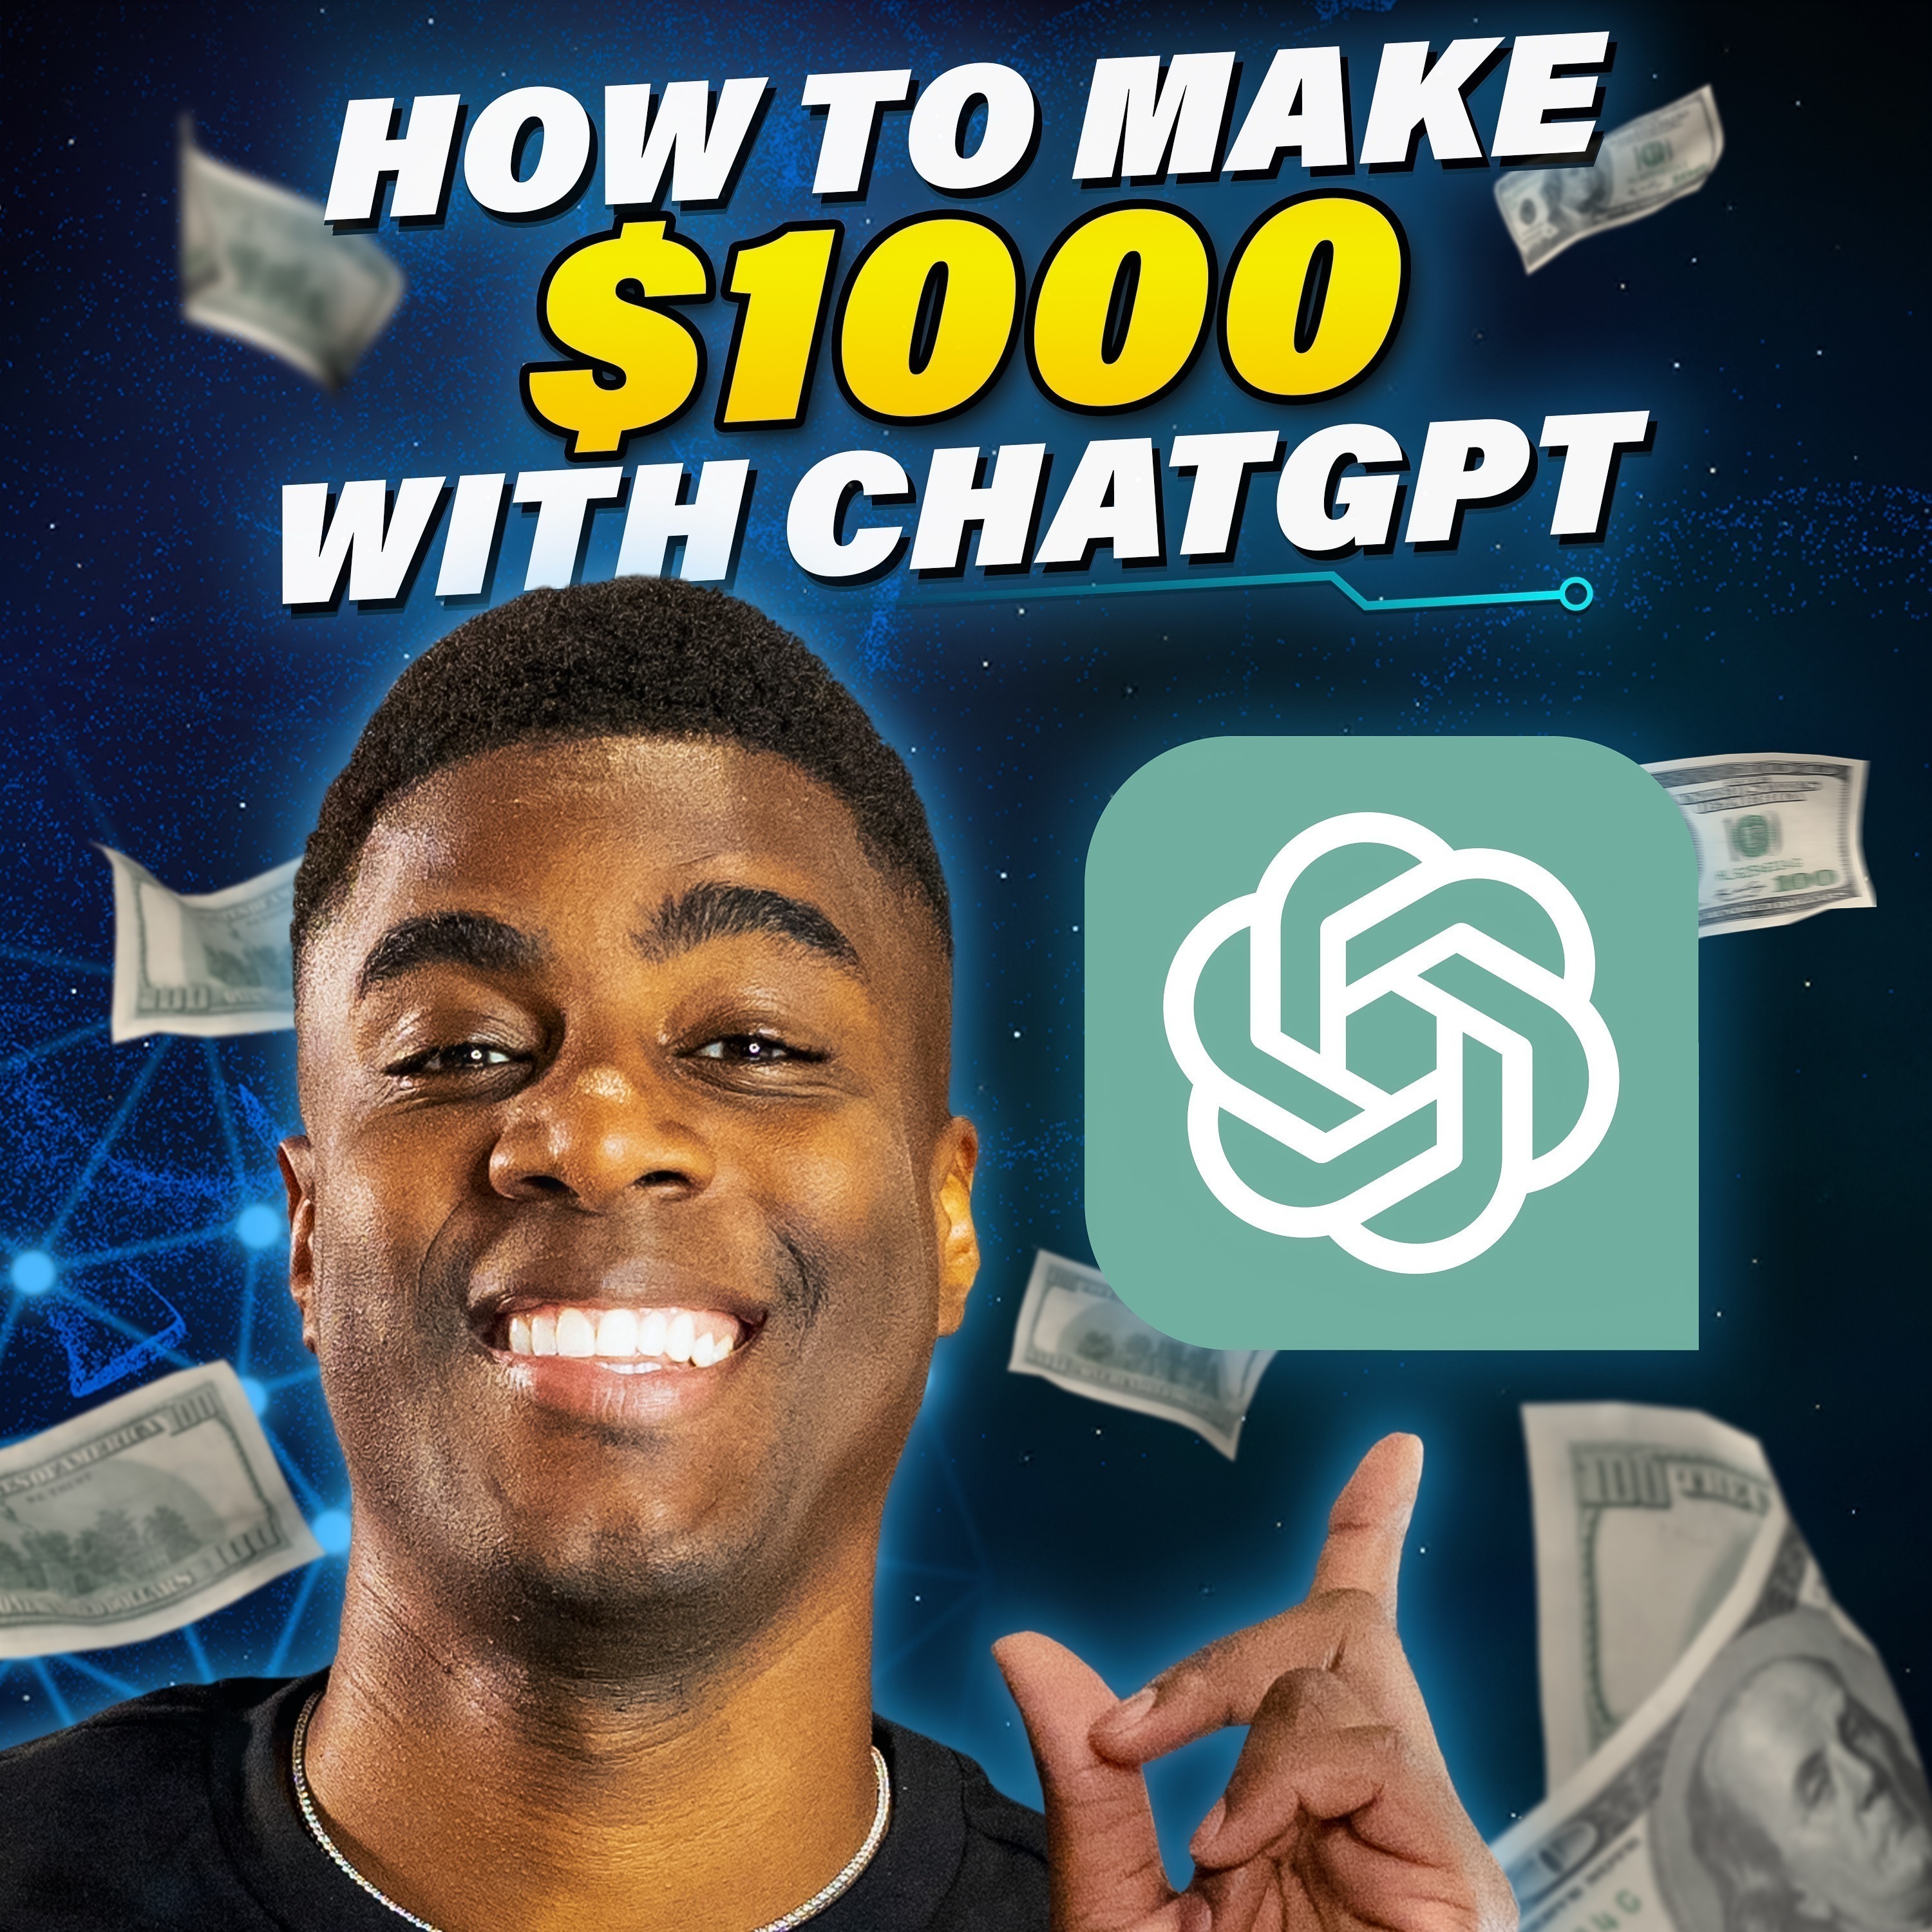 5 Steps to Make $1000 with ChatGPT for Beginners